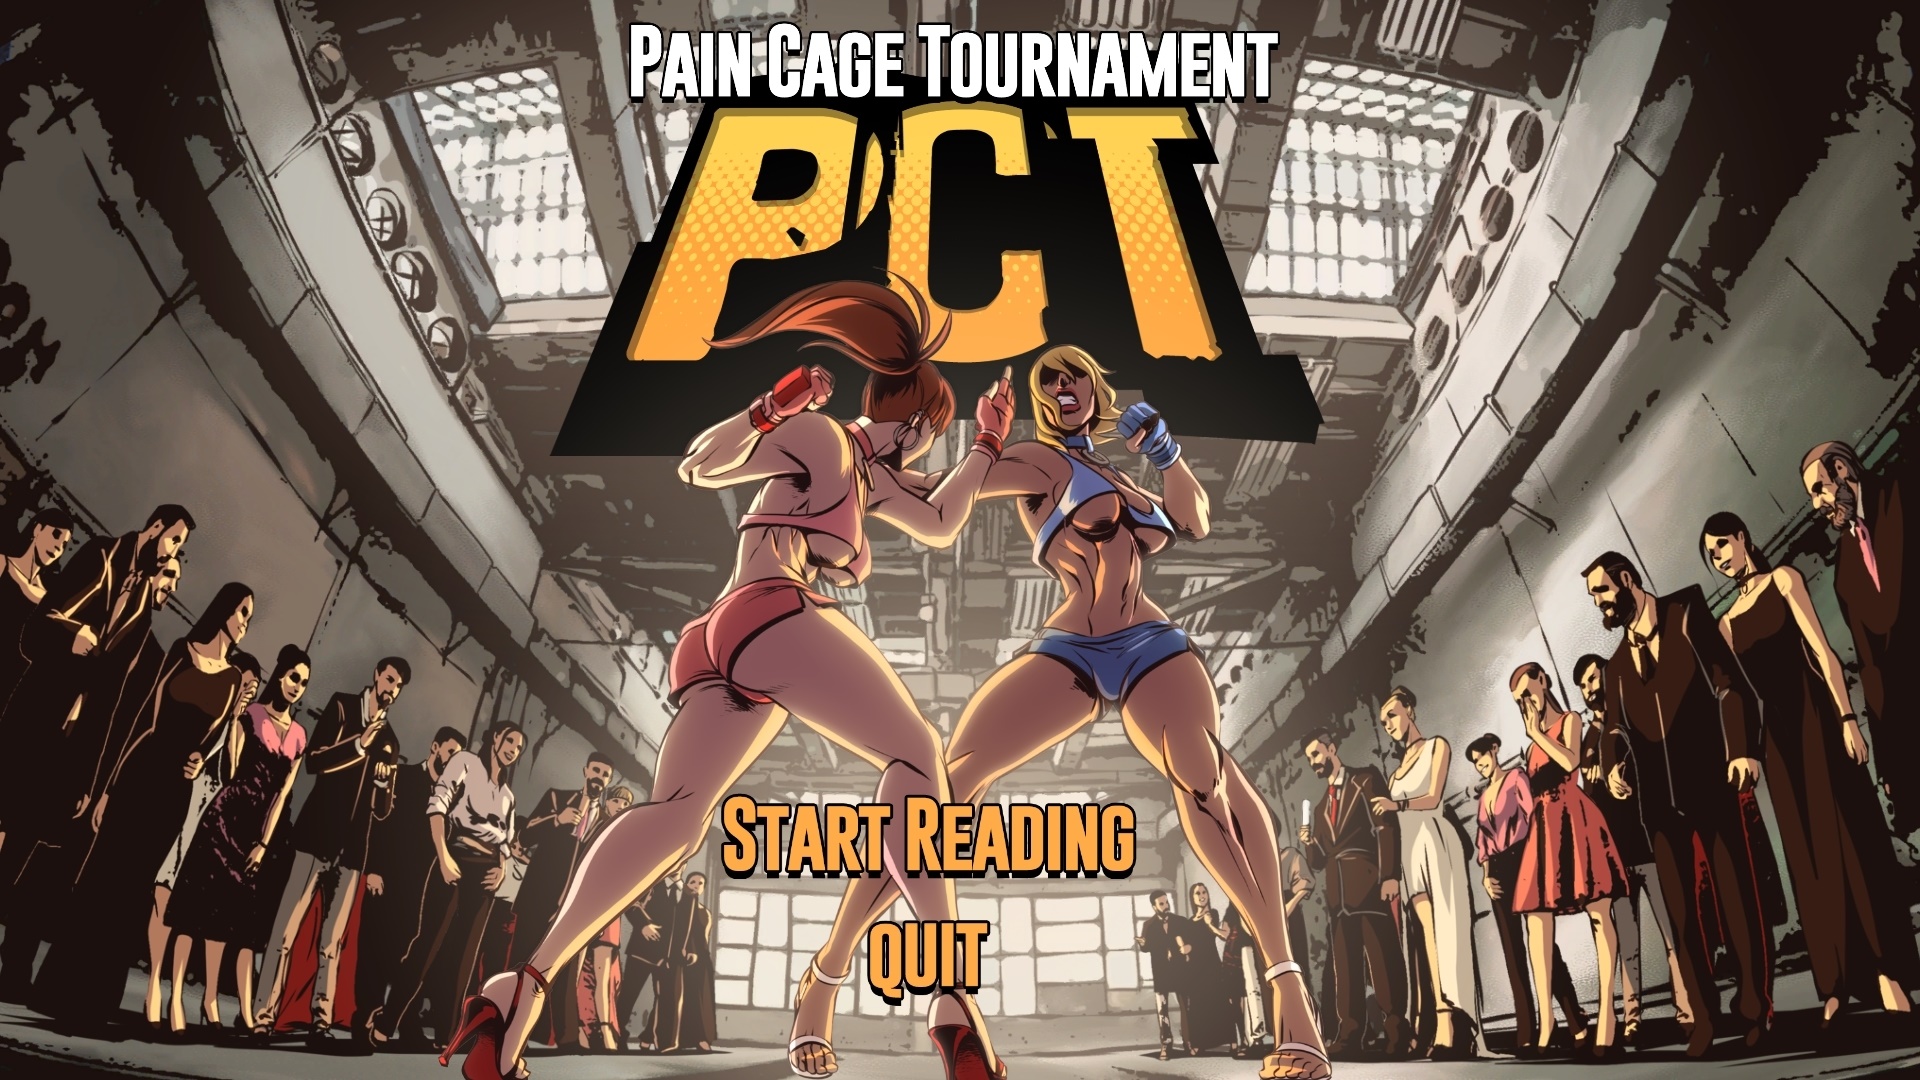 Download Porn Game: Cain Cage Tournament by Developer/Publisher MasterMind games.